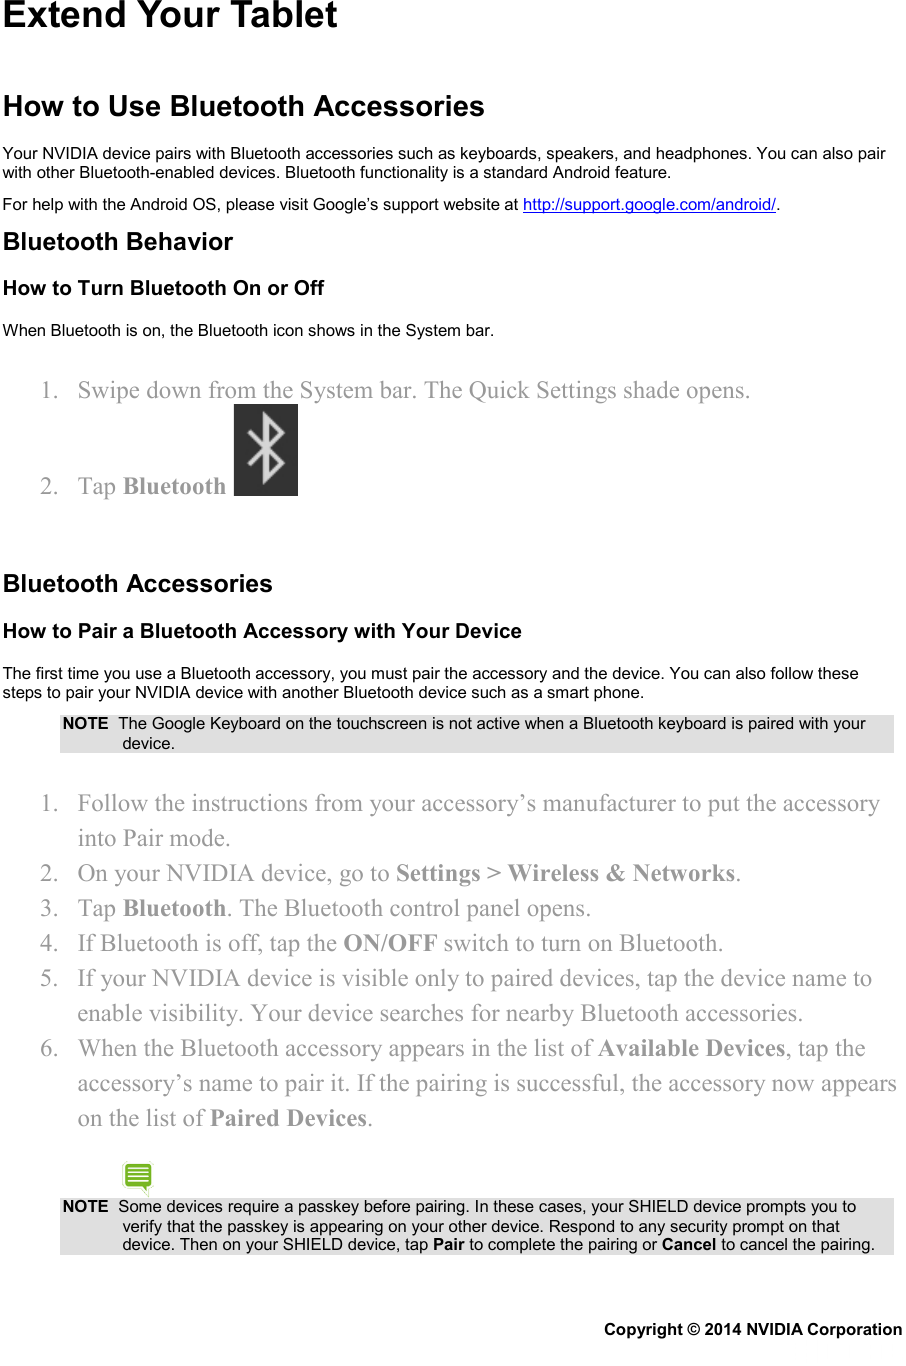 Extend Your Tablet  How to Use Bluetooth Accessories Your NVIDIA device pairs with Bluetooth accessories such as keyboards, speakers, and headphones. You can also pair with other Bluetooth-enabled devices. Bluetooth functionality is a standard Android feature.  For help with the Android OS, please visit Google’s support website at http://support.google.com/android/. Bluetooth Behavior How to Turn Bluetooth On or Off When Bluetooth is on, the Bluetooth icon shows in the System bar. 1. Swipe down from the System bar. The Quick Settings shade opens. 2. Tap Bluetooth     Bluetooth Accessories How to Pair a Bluetooth Accessory with Your Device The first time you use a Bluetooth accessory, you must pair the accessory and the device. You can also follow these steps to pair your NVIDIA device with another Bluetooth device such as a smart phone. NOTE  The Google Keyboard on the touchscreen is not active when a Bluetooth keyboard is paired with your device. 1. Follow the instructions from your accessory’s manufacturer to put the accessory into Pair mode. 2. On your NVIDIA device, go to Settings &gt; Wireless &amp; Networks. 3. Tap Bluetooth. The Bluetooth control panel opens. 4. If Bluetooth is off, tap the ON/OFF switch to turn on Bluetooth. 5. If your NVIDIA device is visible only to paired devices, tap the device name to enable visibility. Your device searches for nearby Bluetooth accessories. 6. When the Bluetooth accessory appears in the list of Available Devices, tap the accessory’s name to pair it. If the pairing is successful, the accessory now appears on the list of Paired Devices. NOTE  Some devices require a passkey before pairing. In these cases, your SHIELD device prompts you to verify that the passkey is appearing on your other device. Respond to any security prompt on that device. Then on your SHIELD device, tap Pair to complete the pairing or Cancel to cancel the pairing. Copyright © 2014 NVIDIA Corporation   